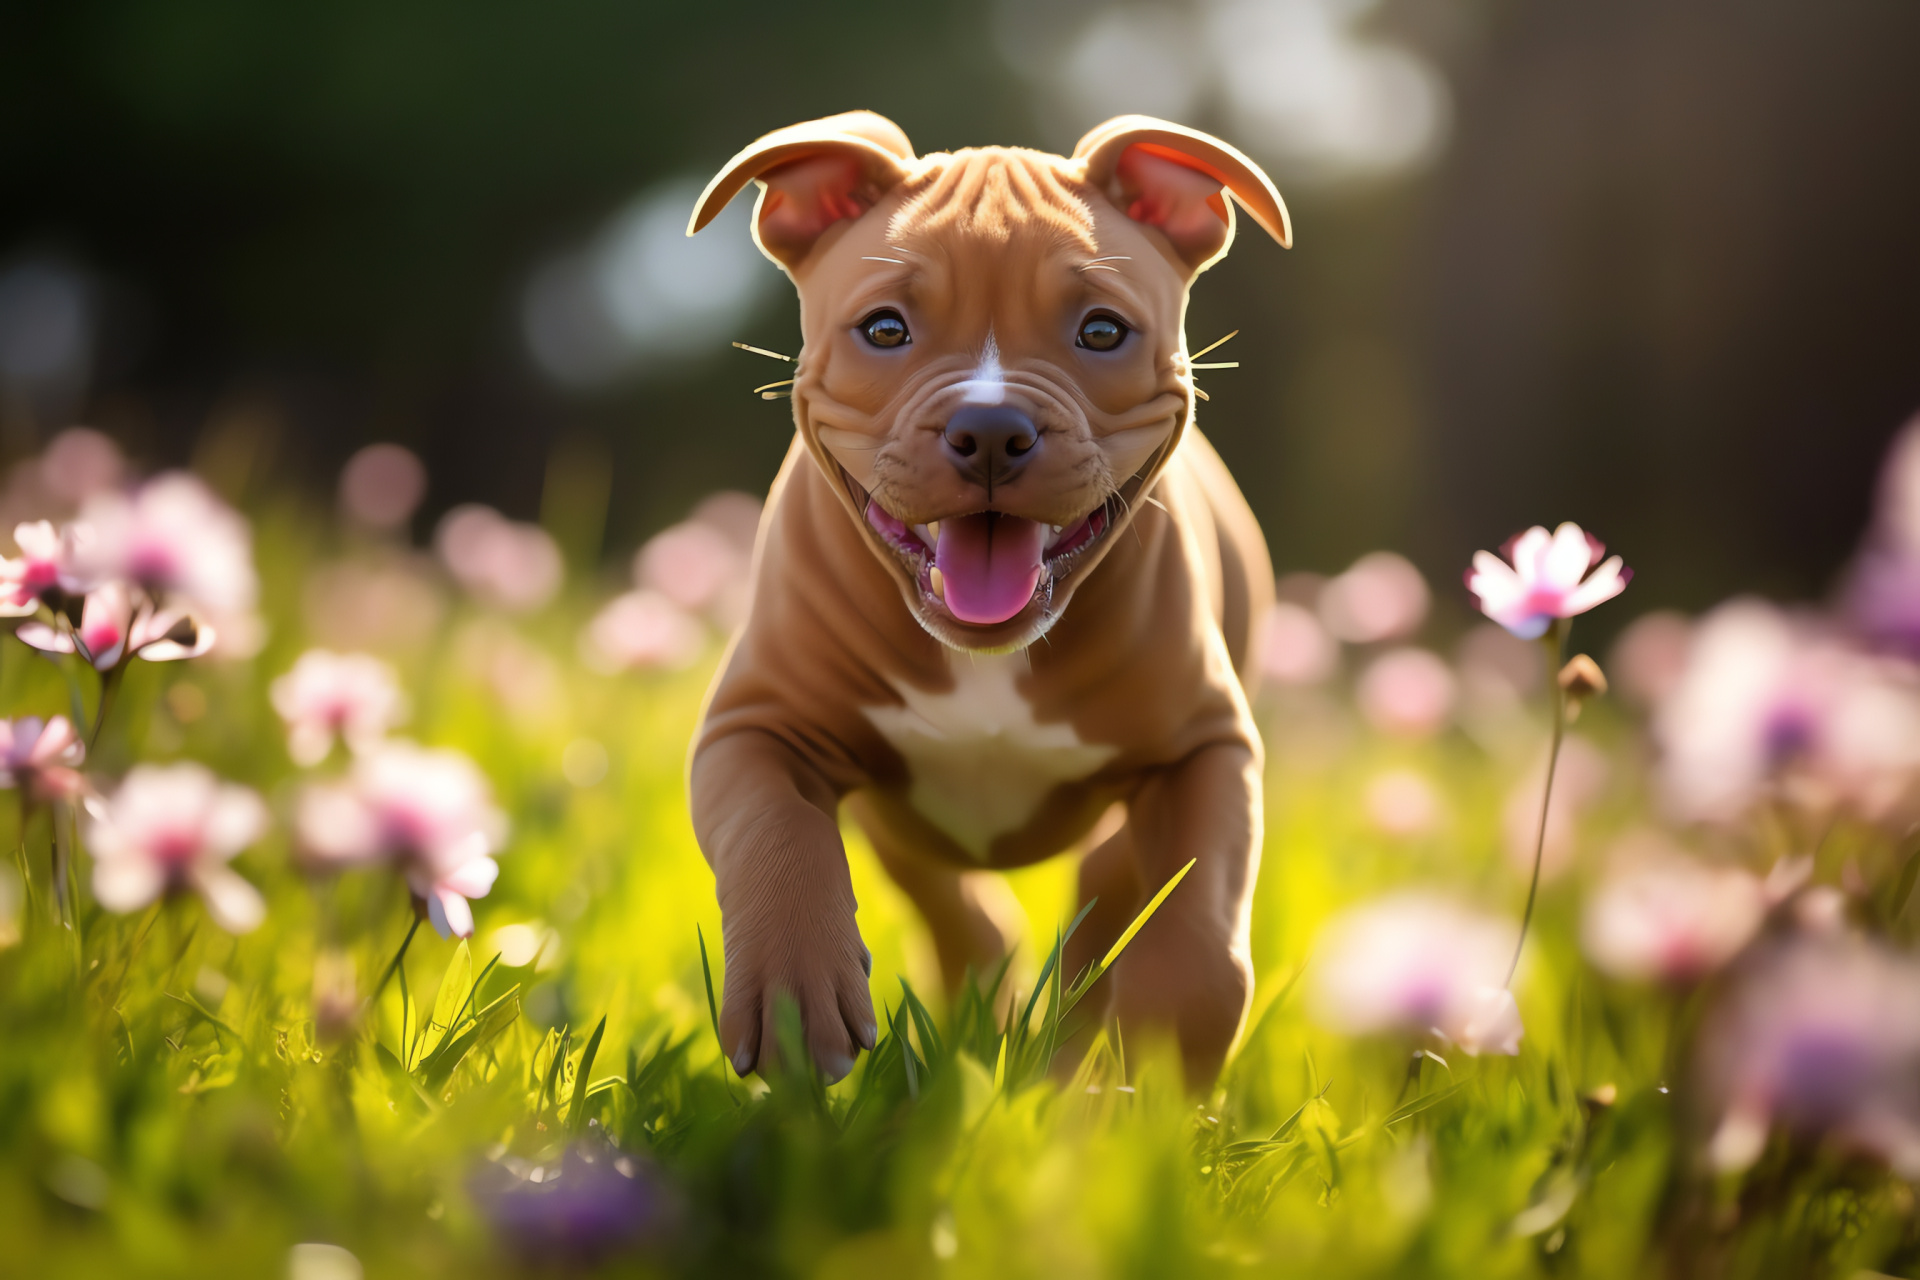 Pitbull puppy play, juvenile canine, pet outdoor enjoyment, park obstacle setting, lively animal posture, HD Desktop Wallpaper